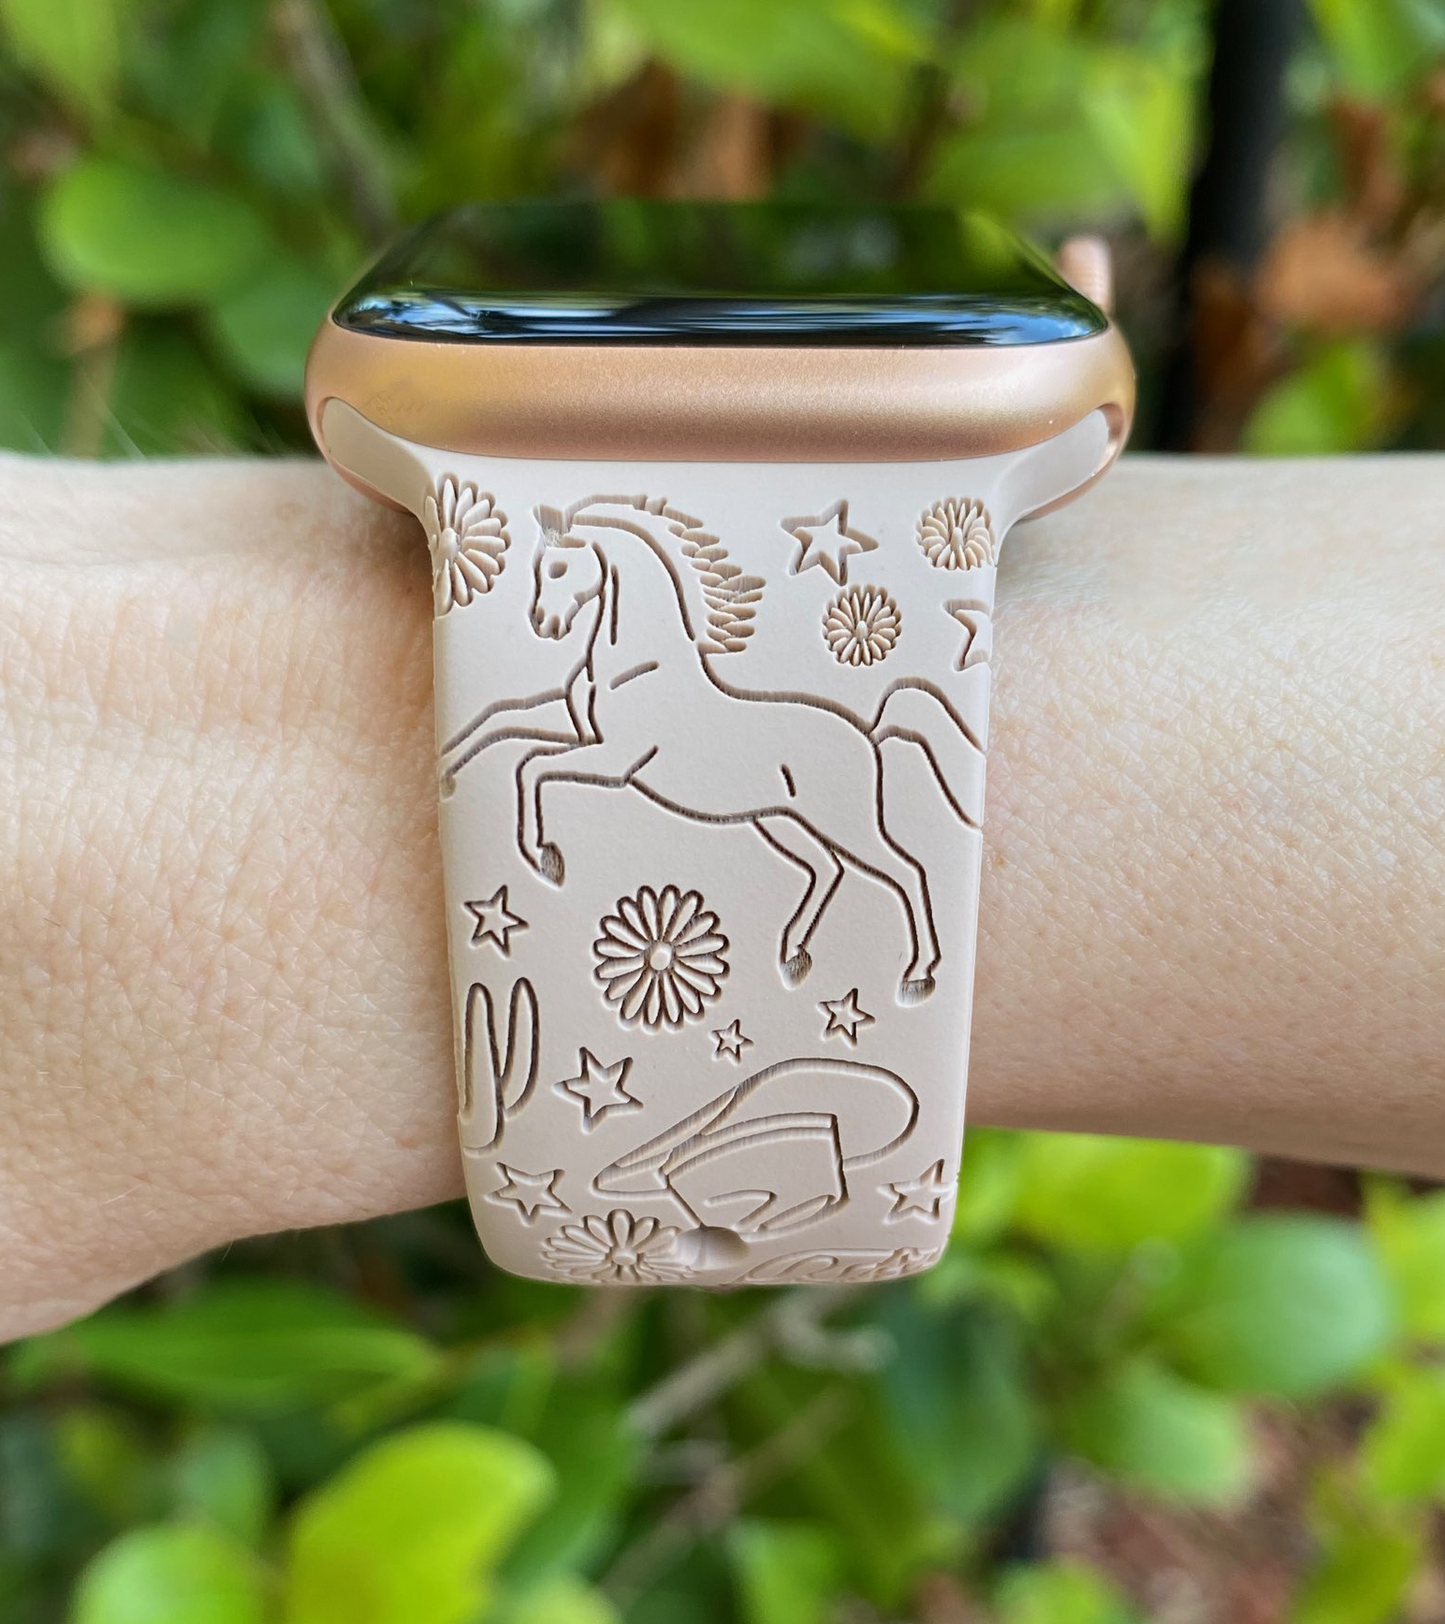 Horse Lover Apple Watch Band